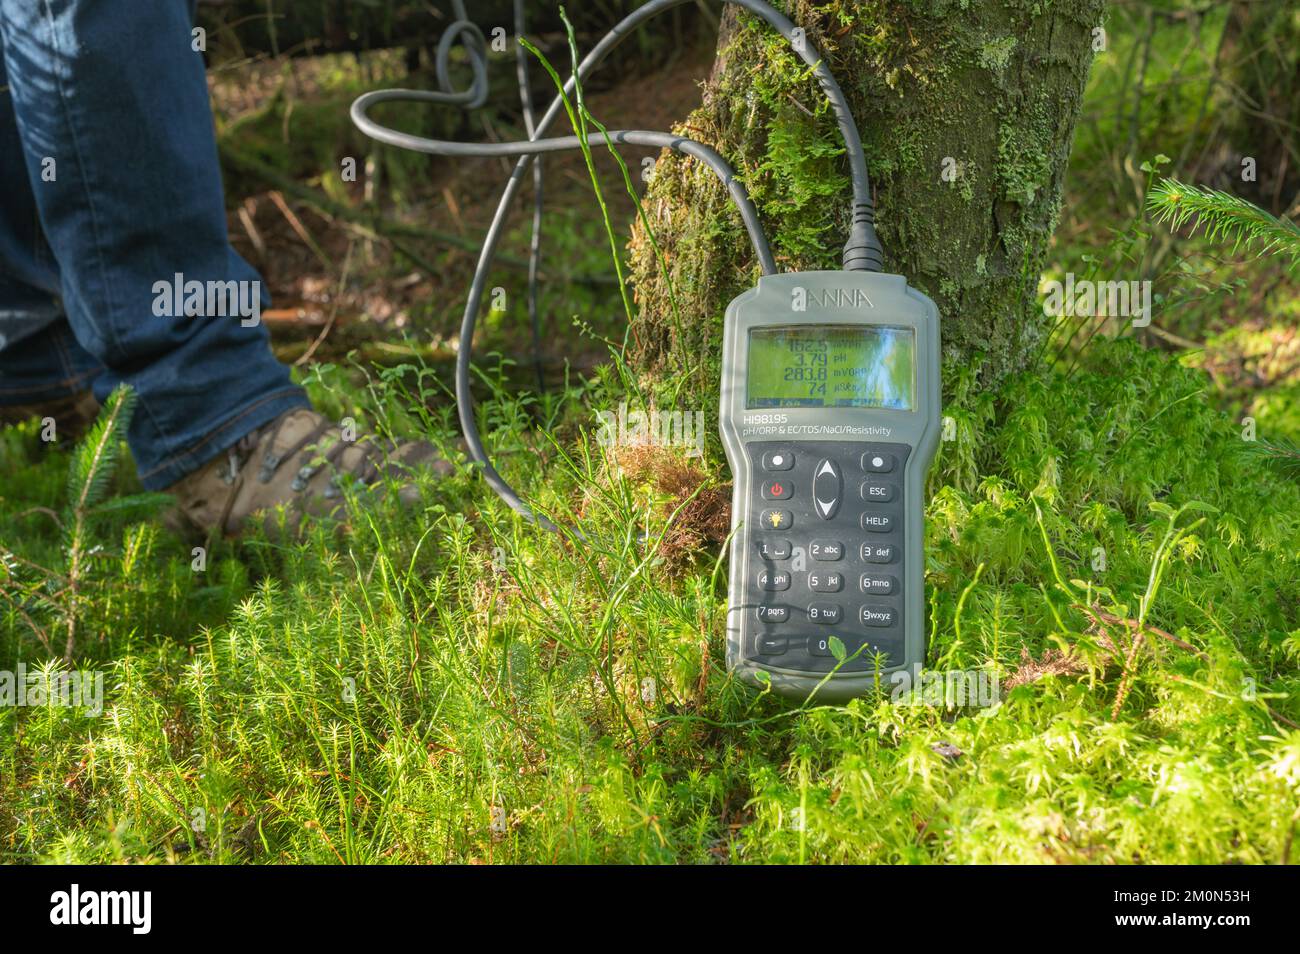 Hanna probe and meter measuring chemical proprties of water in the headwaters of the River Doethie, Bryn Deilos, Wales, UK Stock Photo